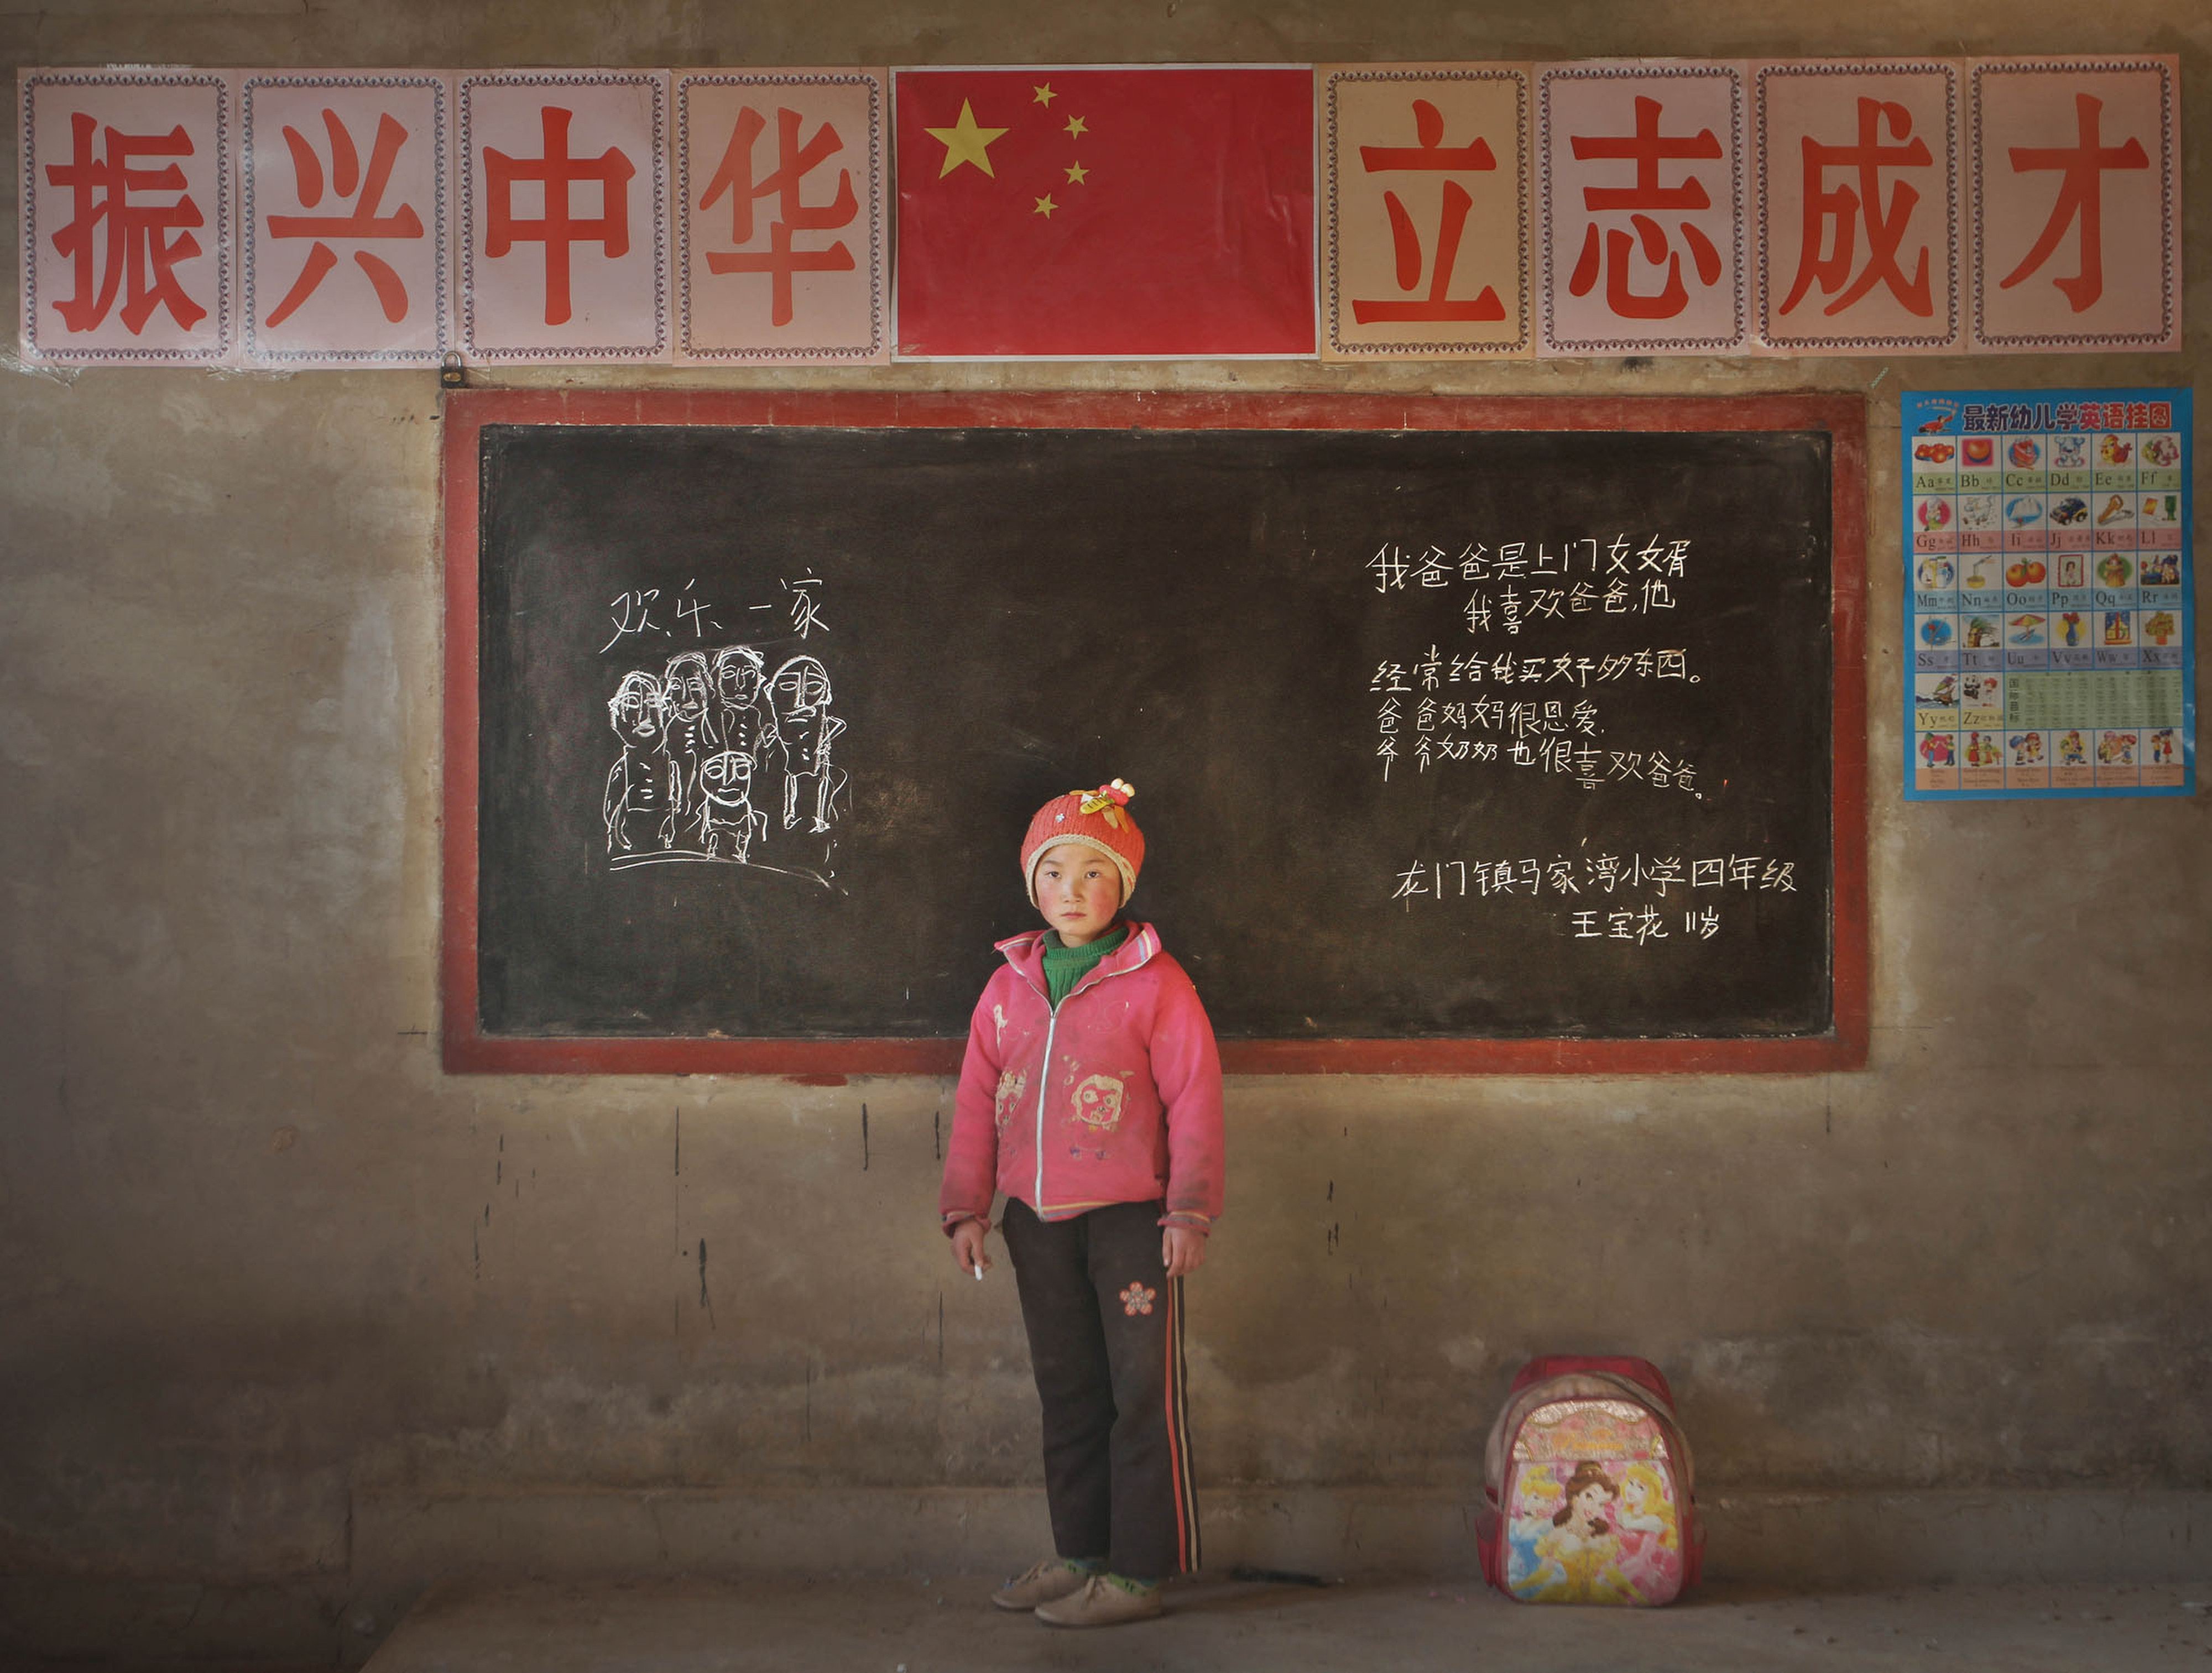 China has millions of left behind children in rural areas. Photo: Ren Shi Chen